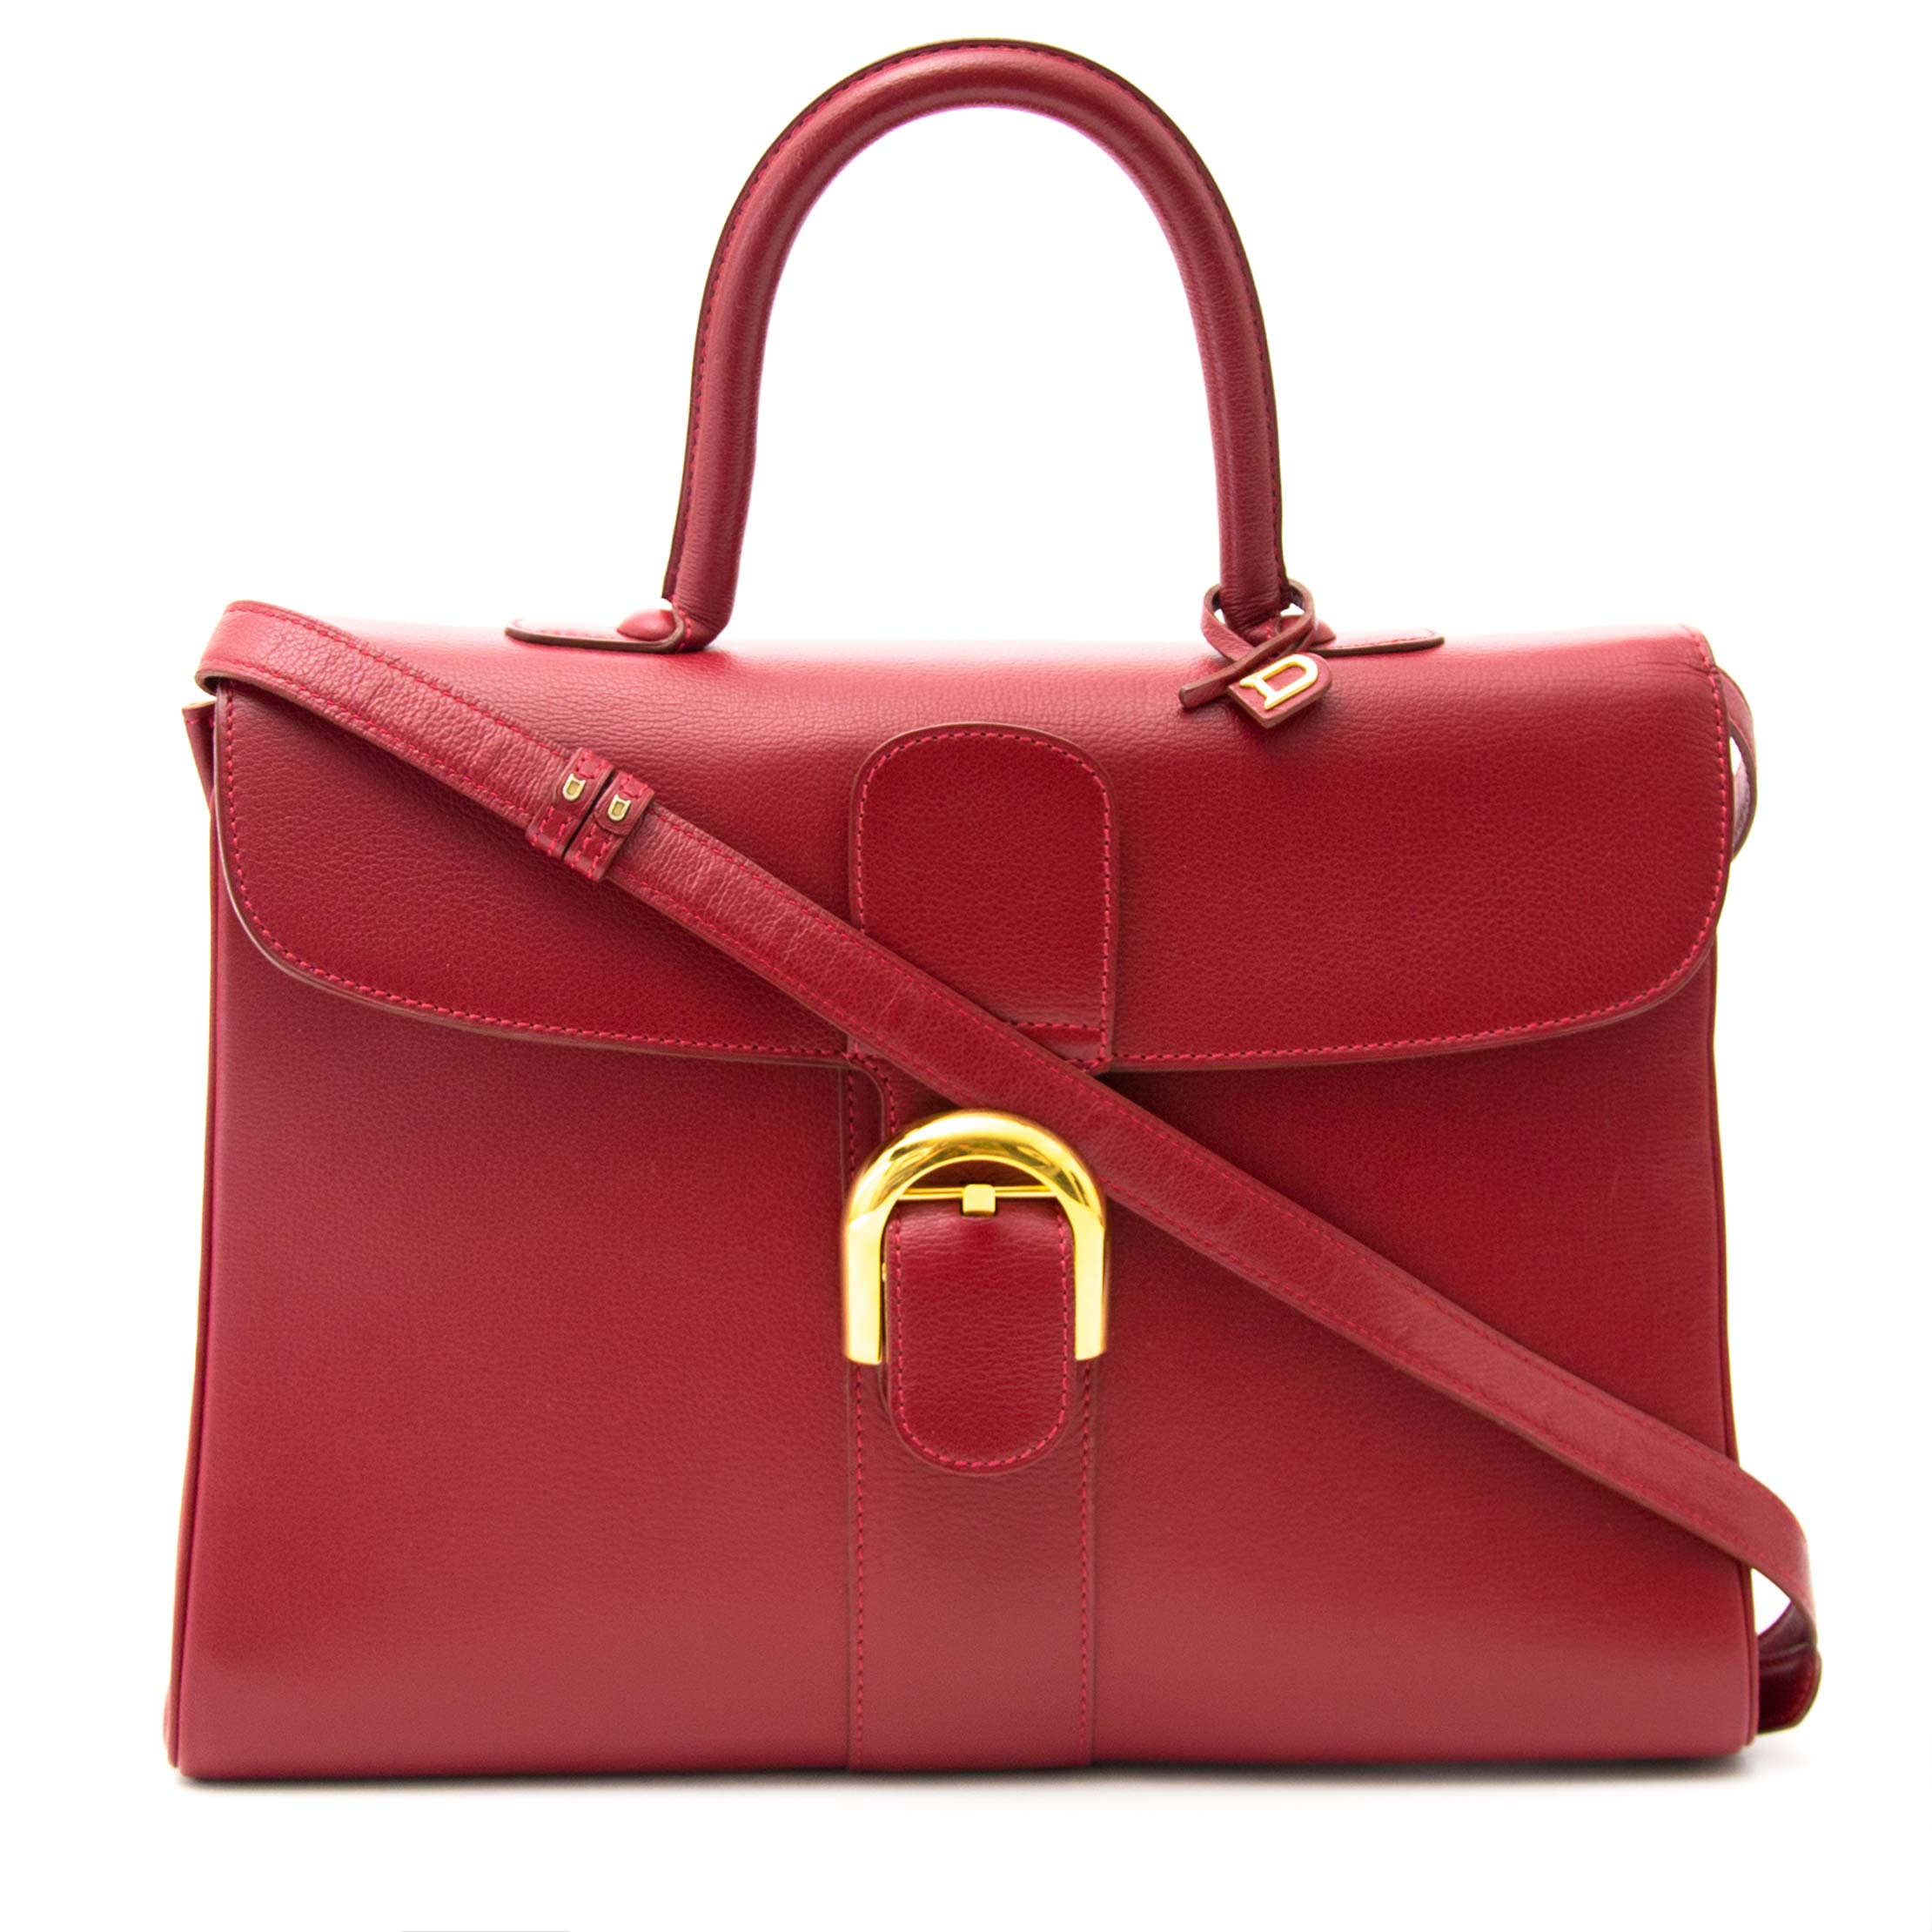 Brillant leather handbag Delvaux Red in Leather - 20976888